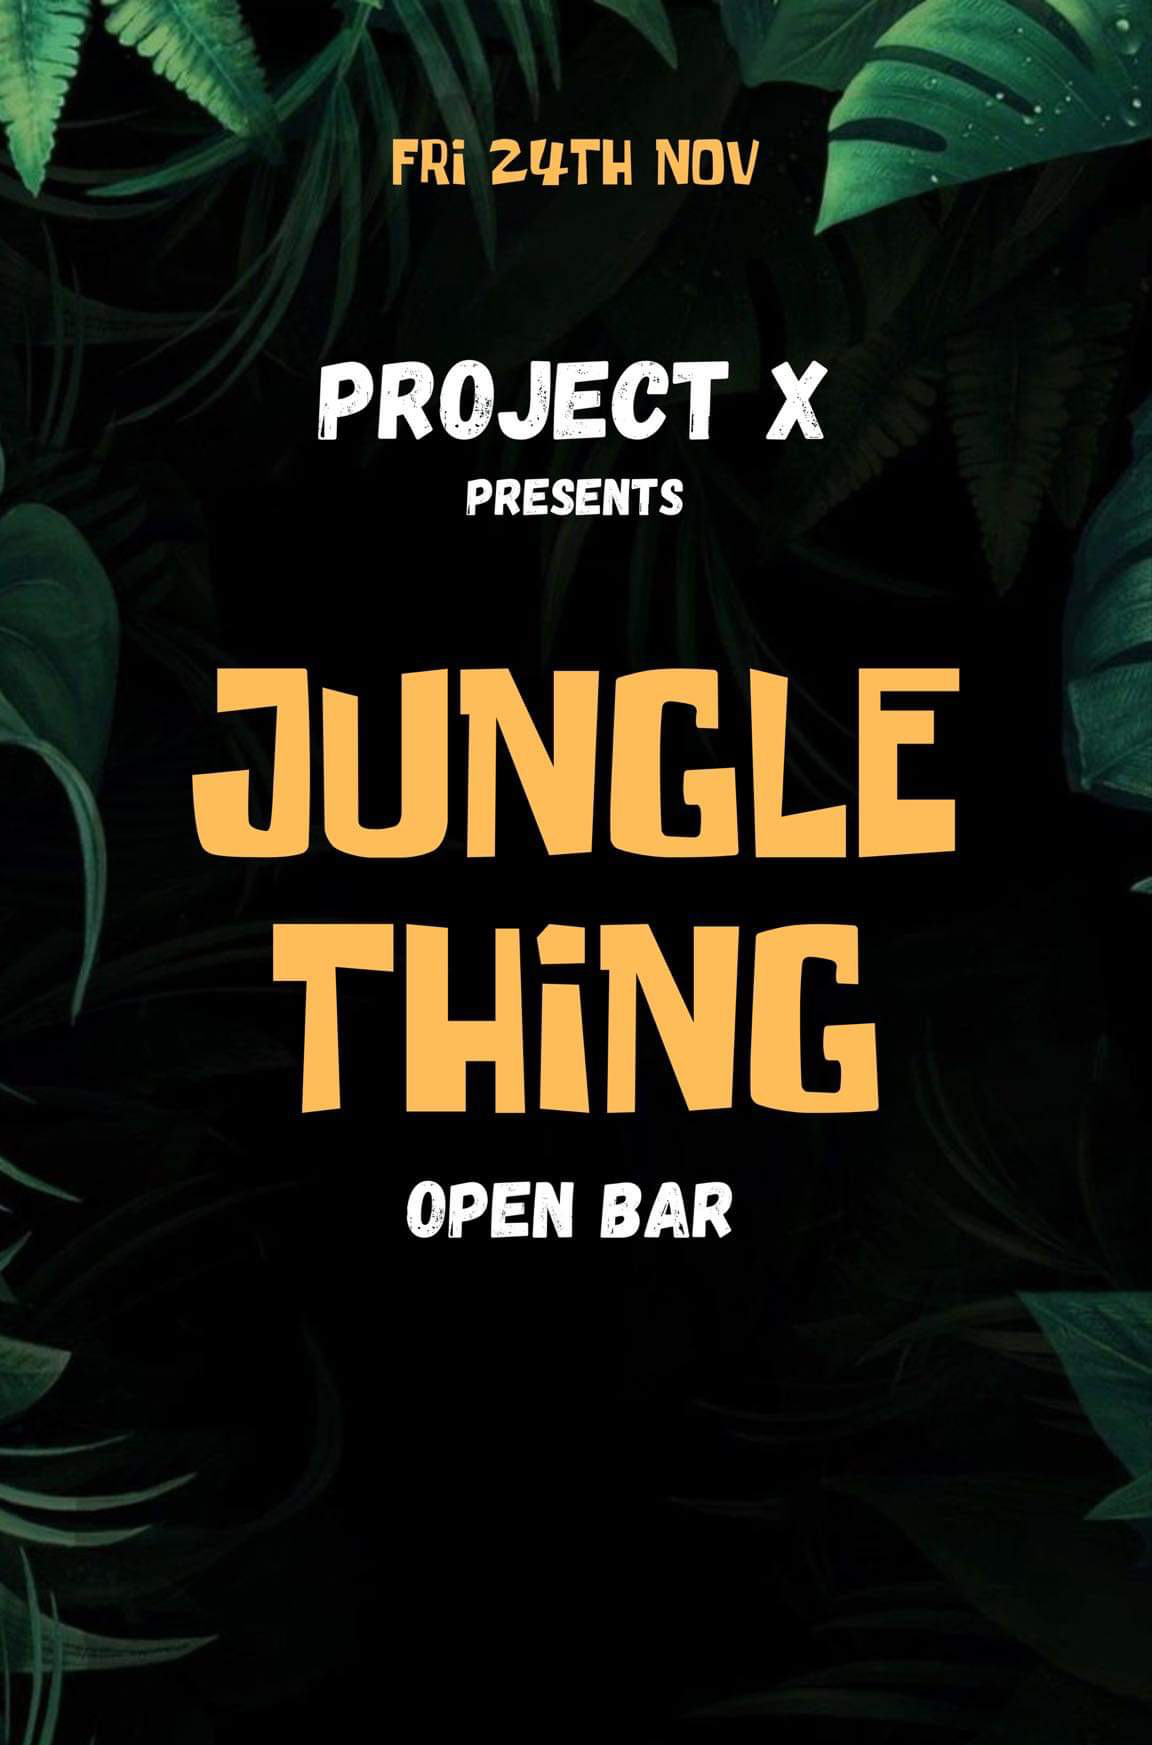 Project X .:. Jungle Thing Open Bar poster